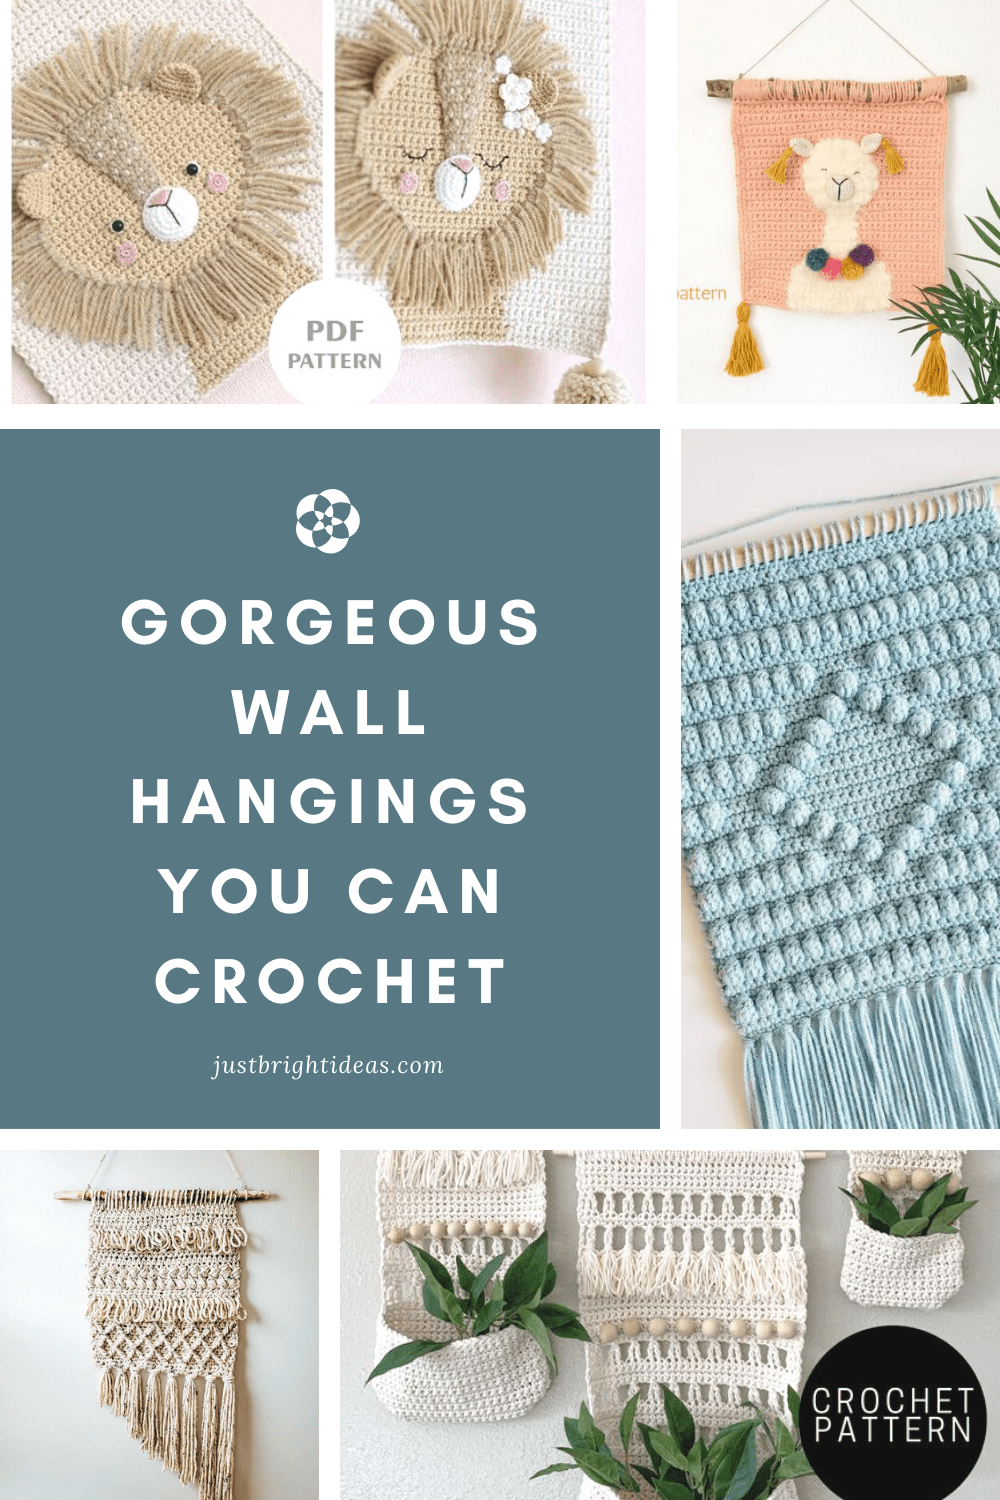 Wall hangings are so trendy right now and these crochet patterns are relaxing to make and perfect for bringing a pop of color of boho vibe to your blank walls